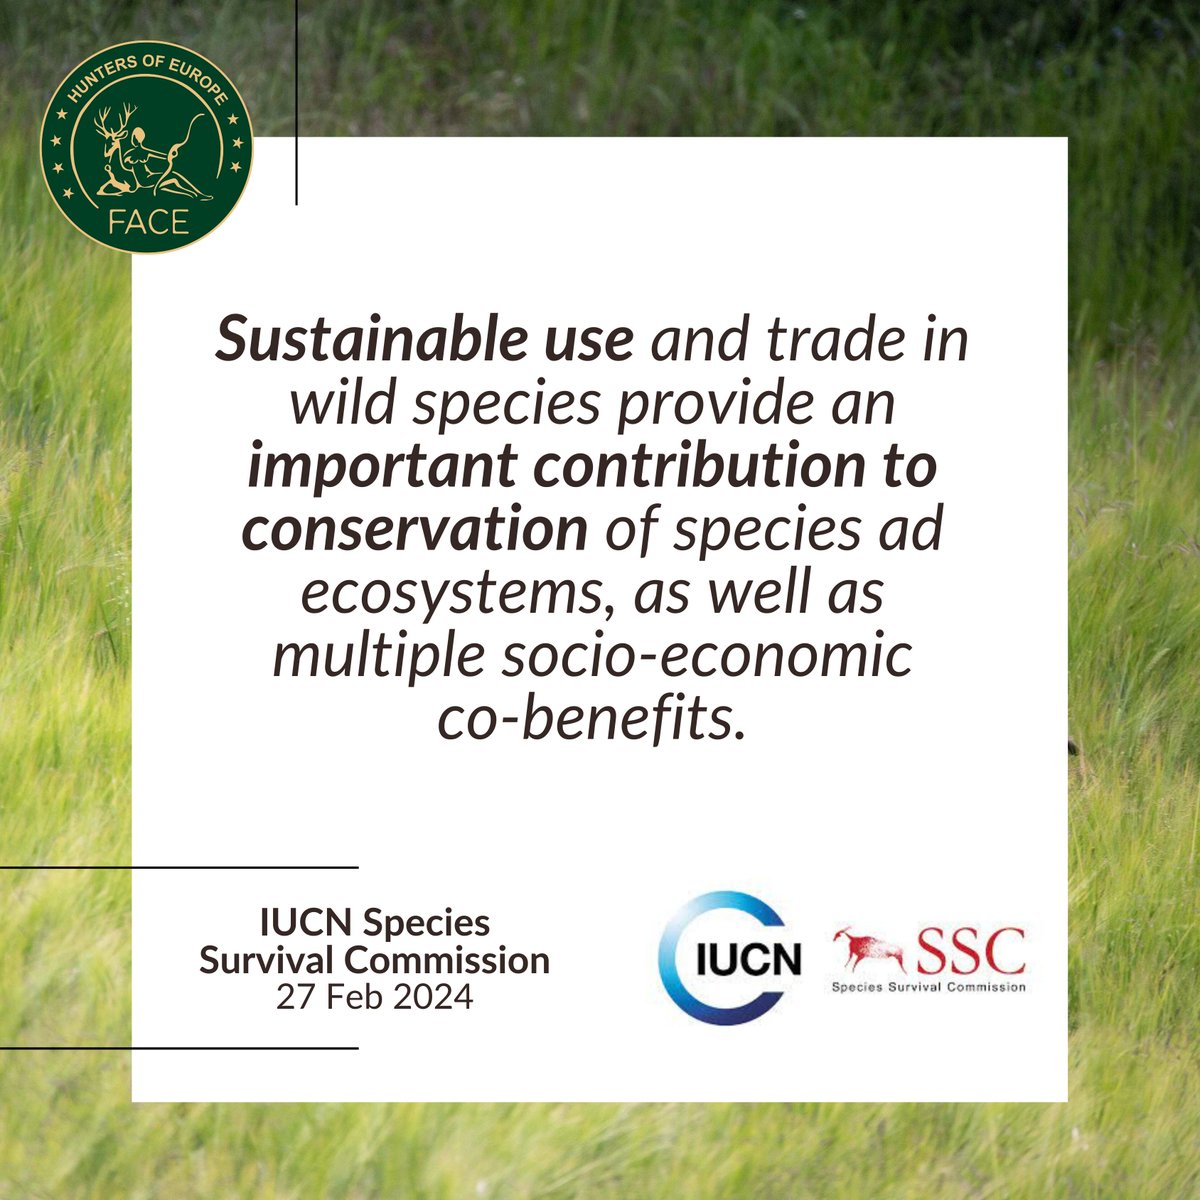 🌳🦌 Yesterday, the @IUCN Species Survival Commission's Webinar on the #GlobalBiodiversity Framework highlighted the key role of #SustainableUse in conserving species, ecosystems, and bringing socio-economic benefits. 🌍✨ FACE is on board with this vision!

👀 Take a look at